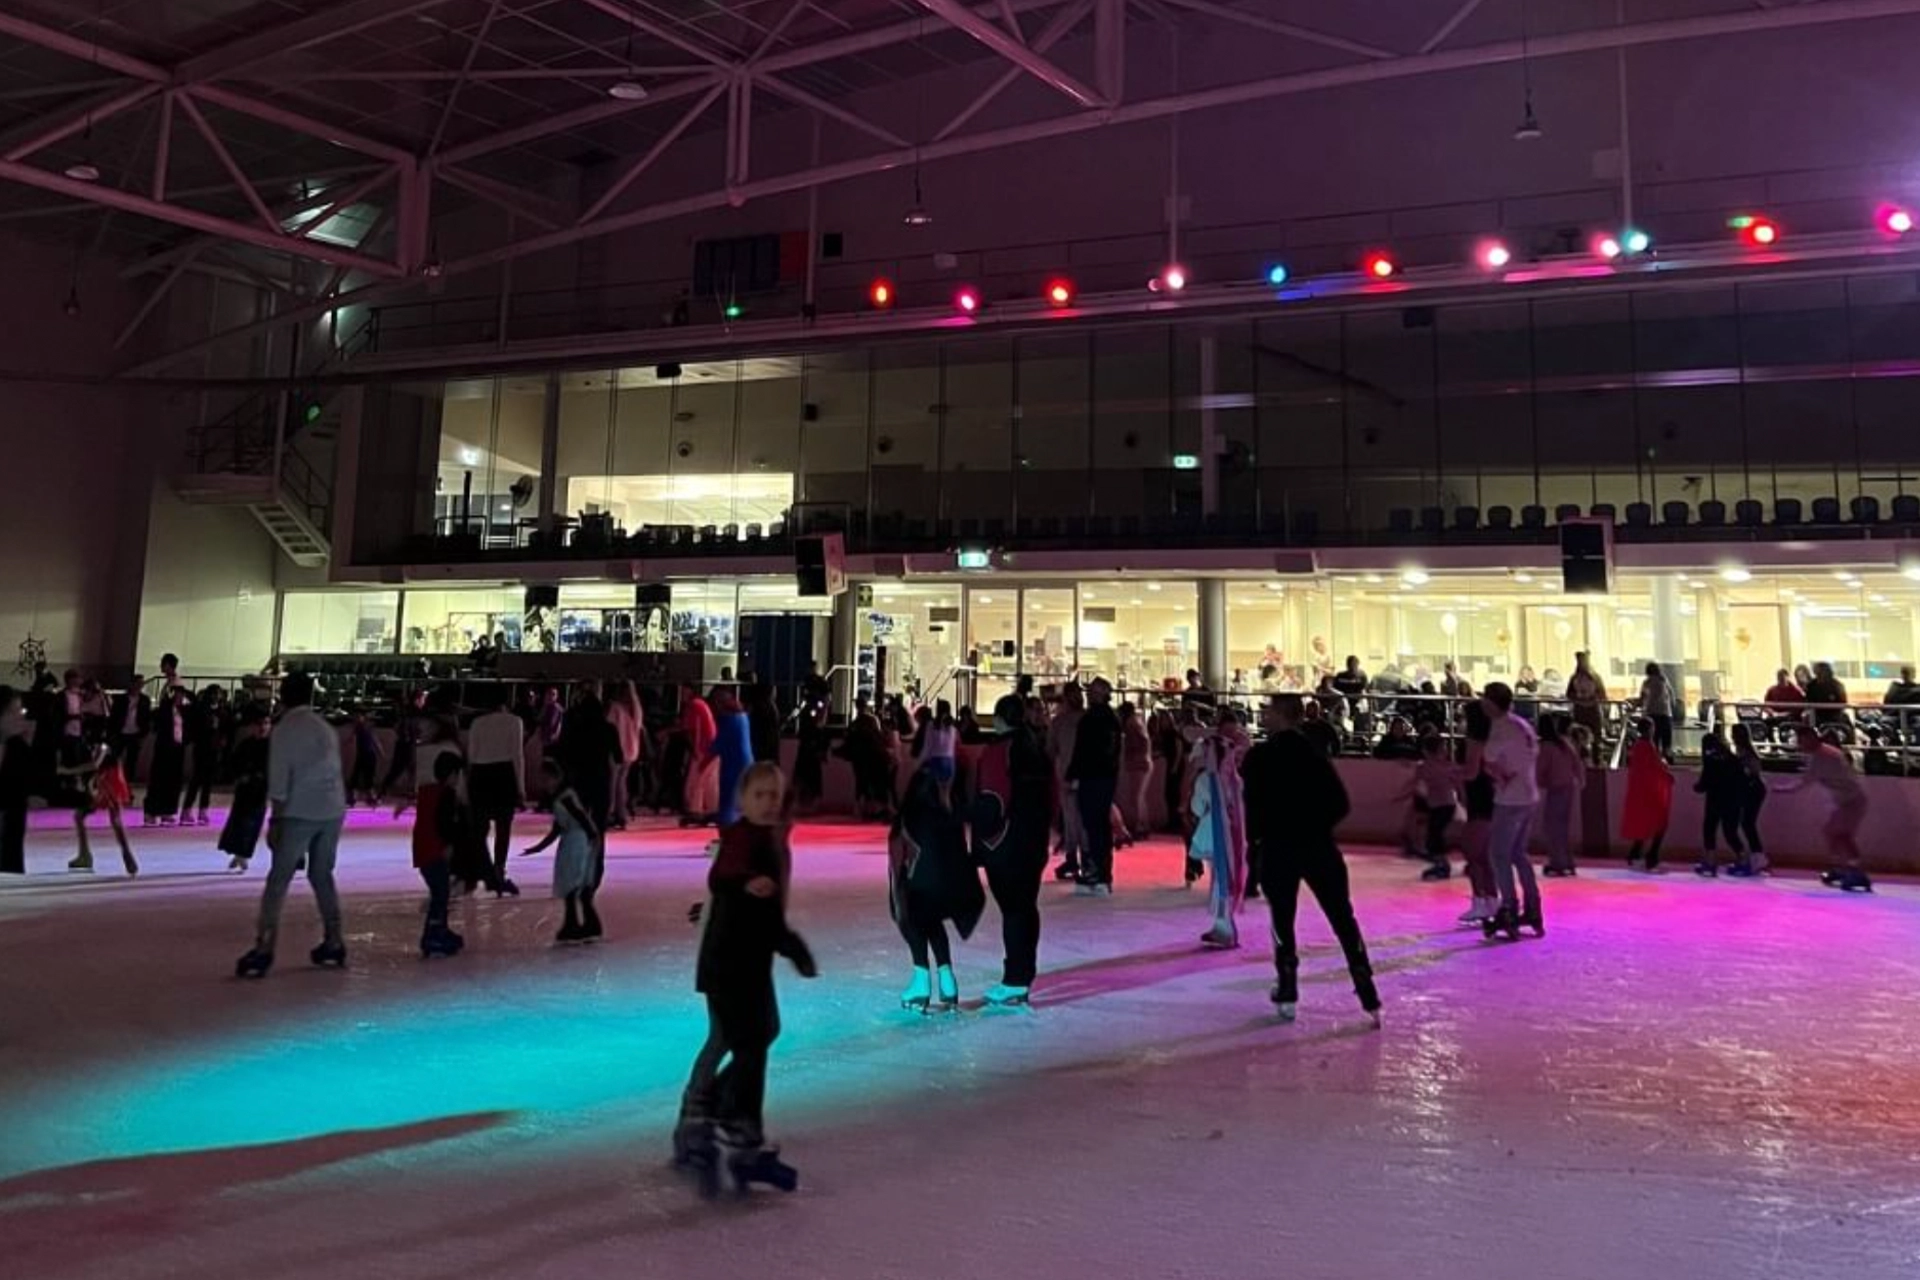 A group of people skating on an indoor ice rink.